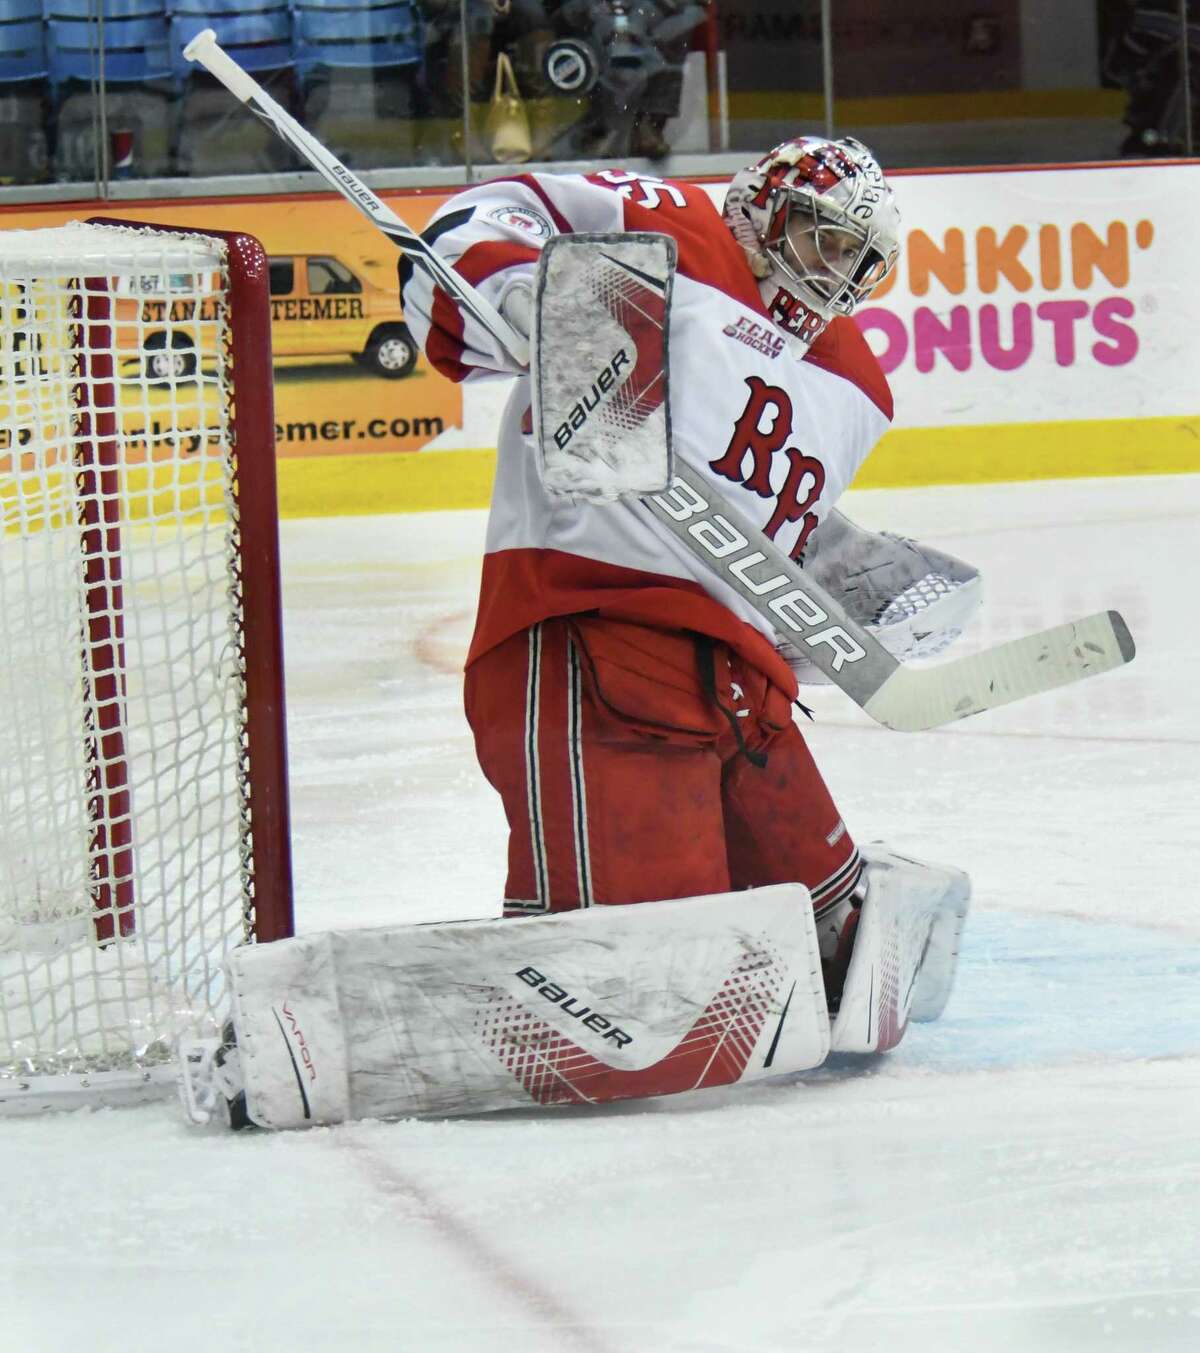 Rensselaer Polytechnic Institute goaltender Chase Perry blocks a shot during a game against University of Maine at RPI campus on Saturday, Dec. 30, 2017, in Troy, N.Y. (Jenn March/Special to the Times Union)